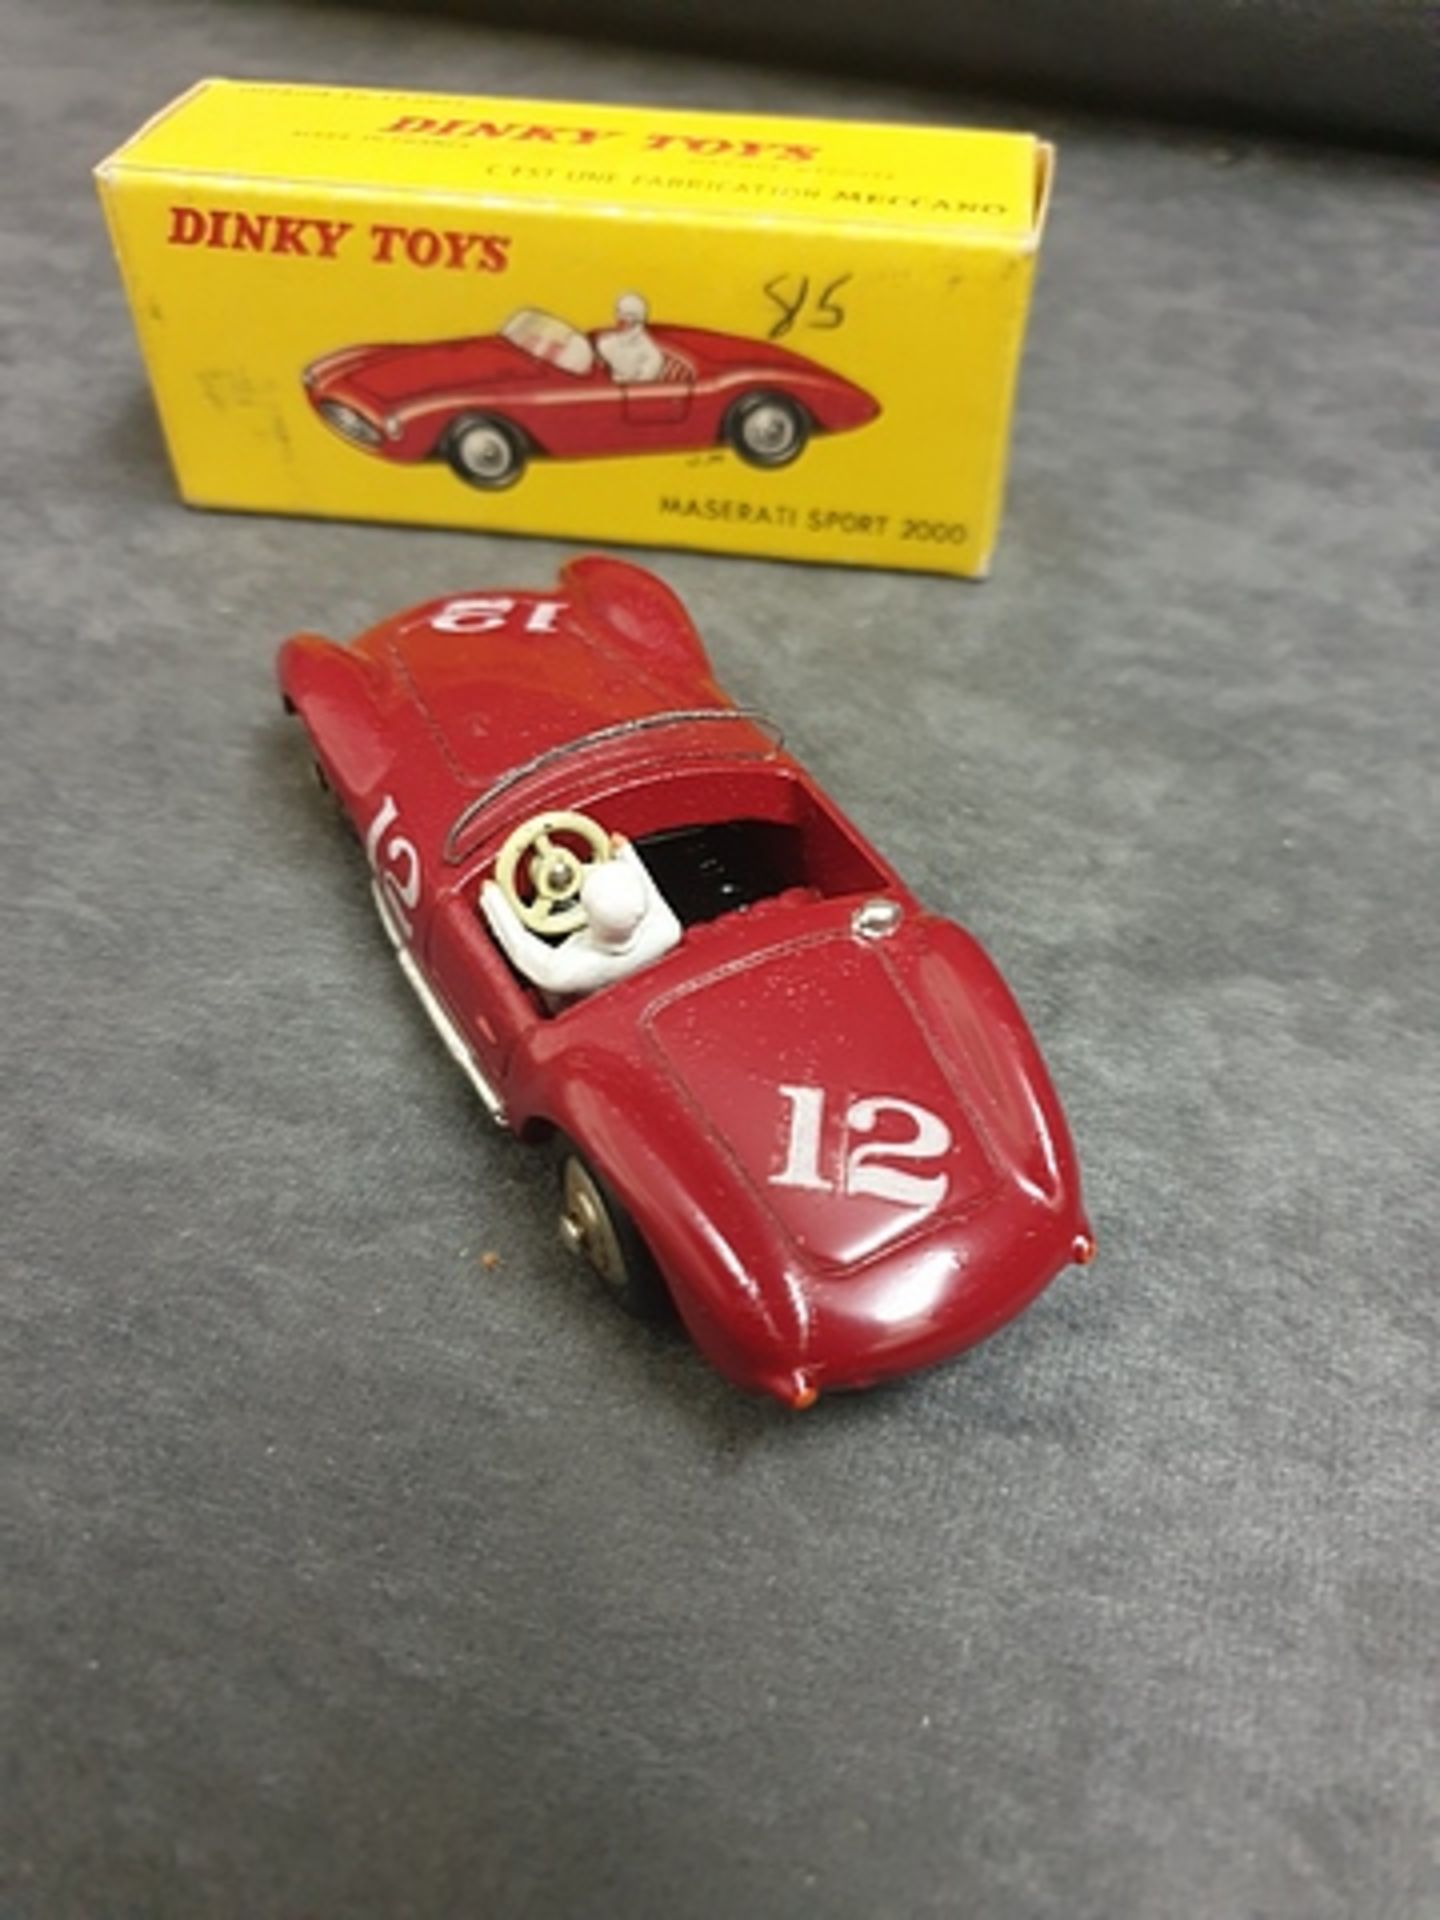 French Dinky #22A Maserati Sport 2000 Mint Model In Box